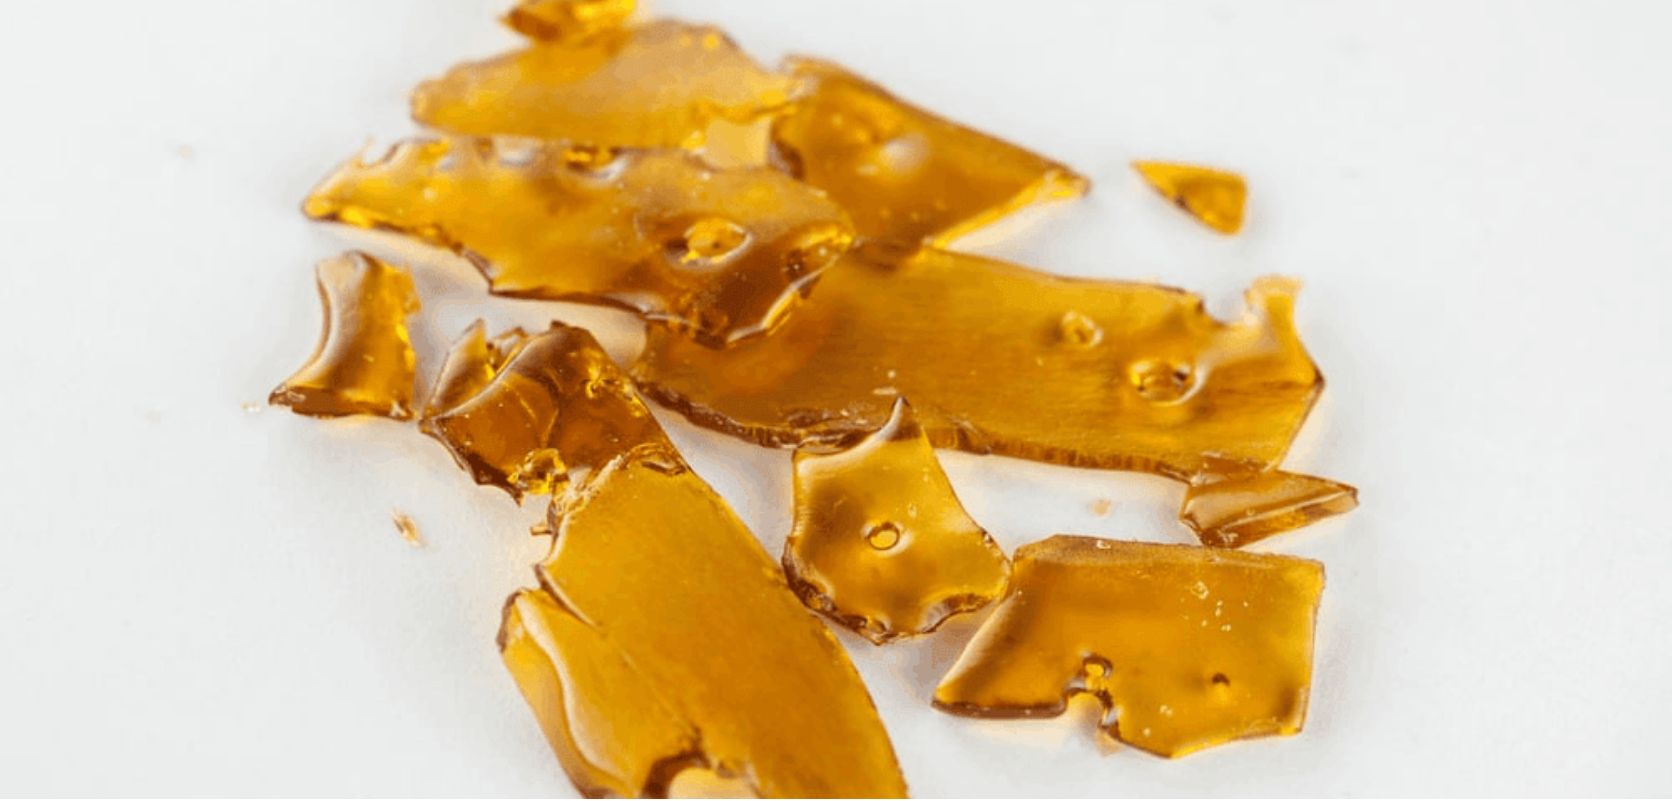 While there are enough cannabis products in local dispensaries to make Bob Marley's head spin, it's far more convenient and often cheaper to buy shatter online. 